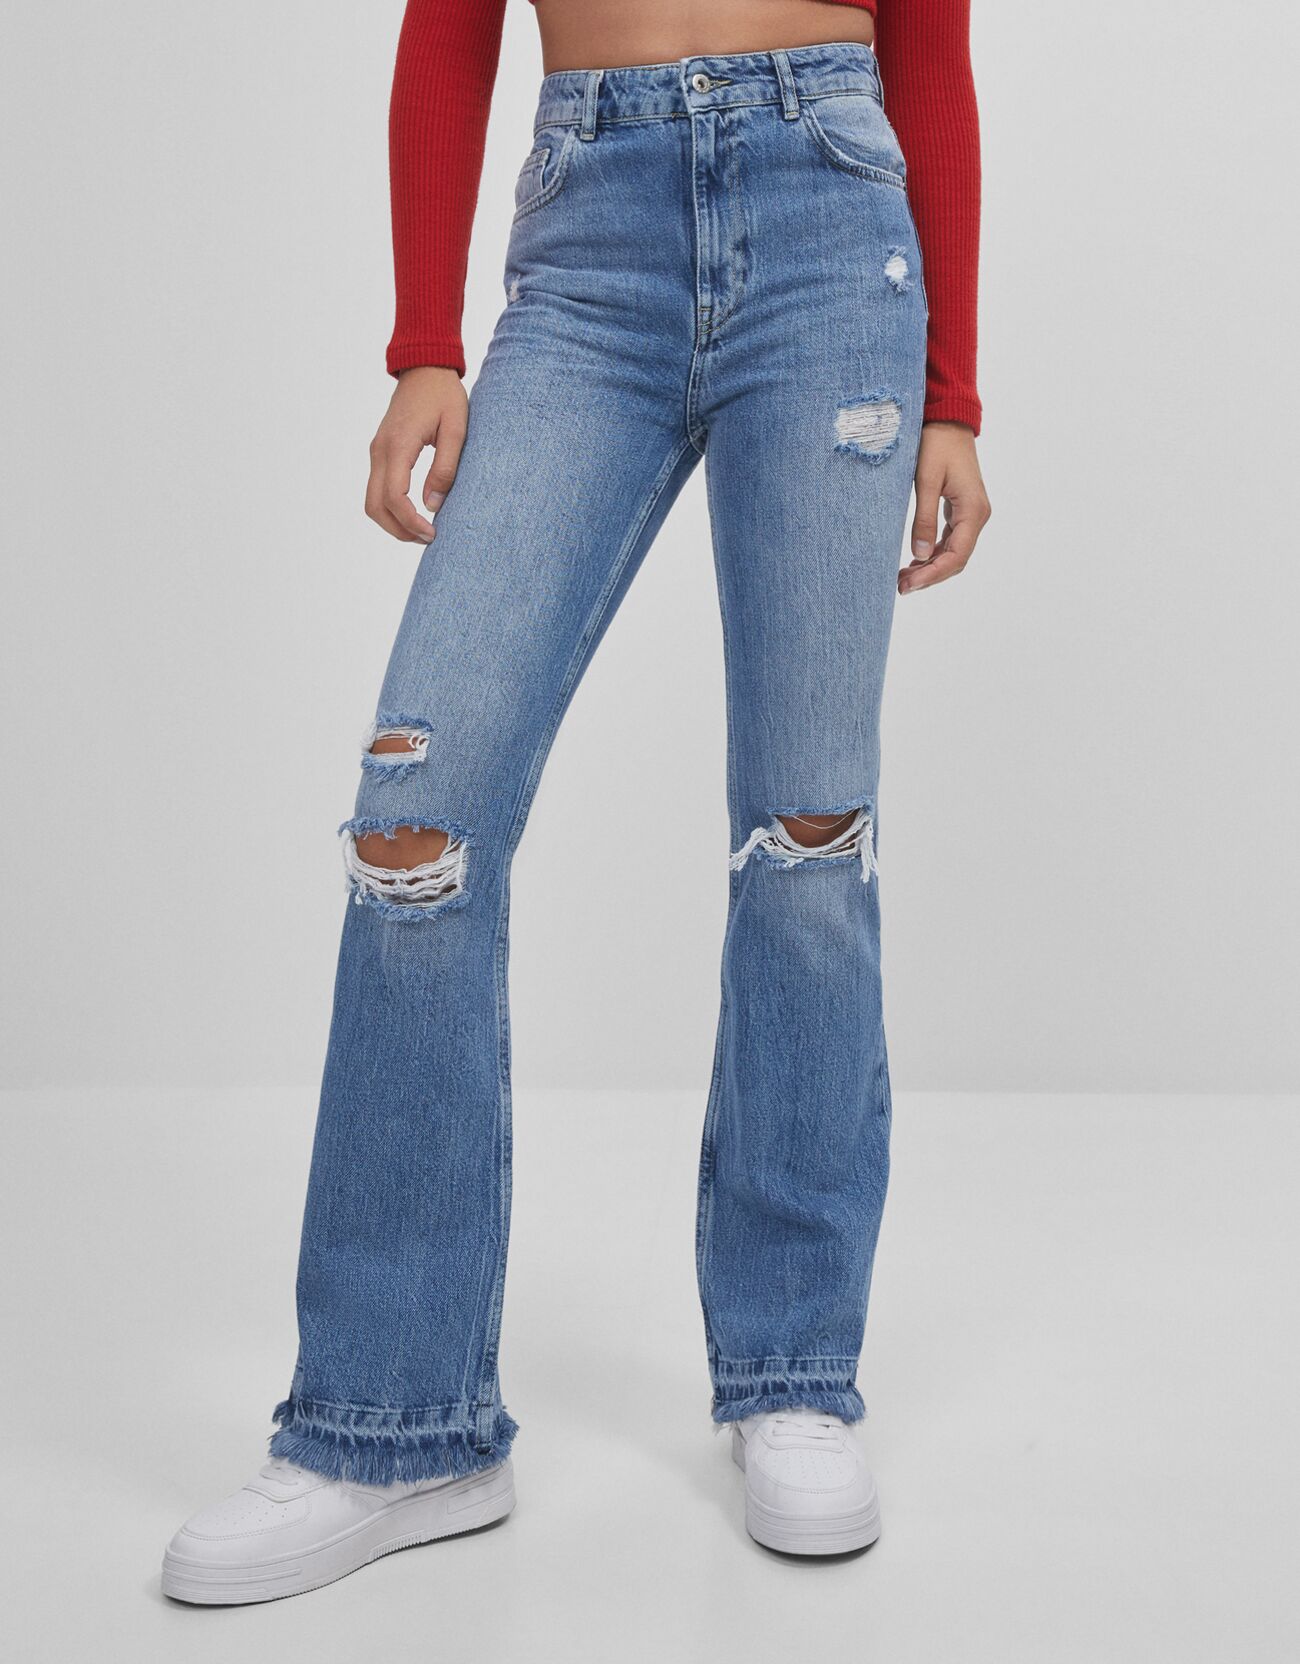 flare jeans with rips